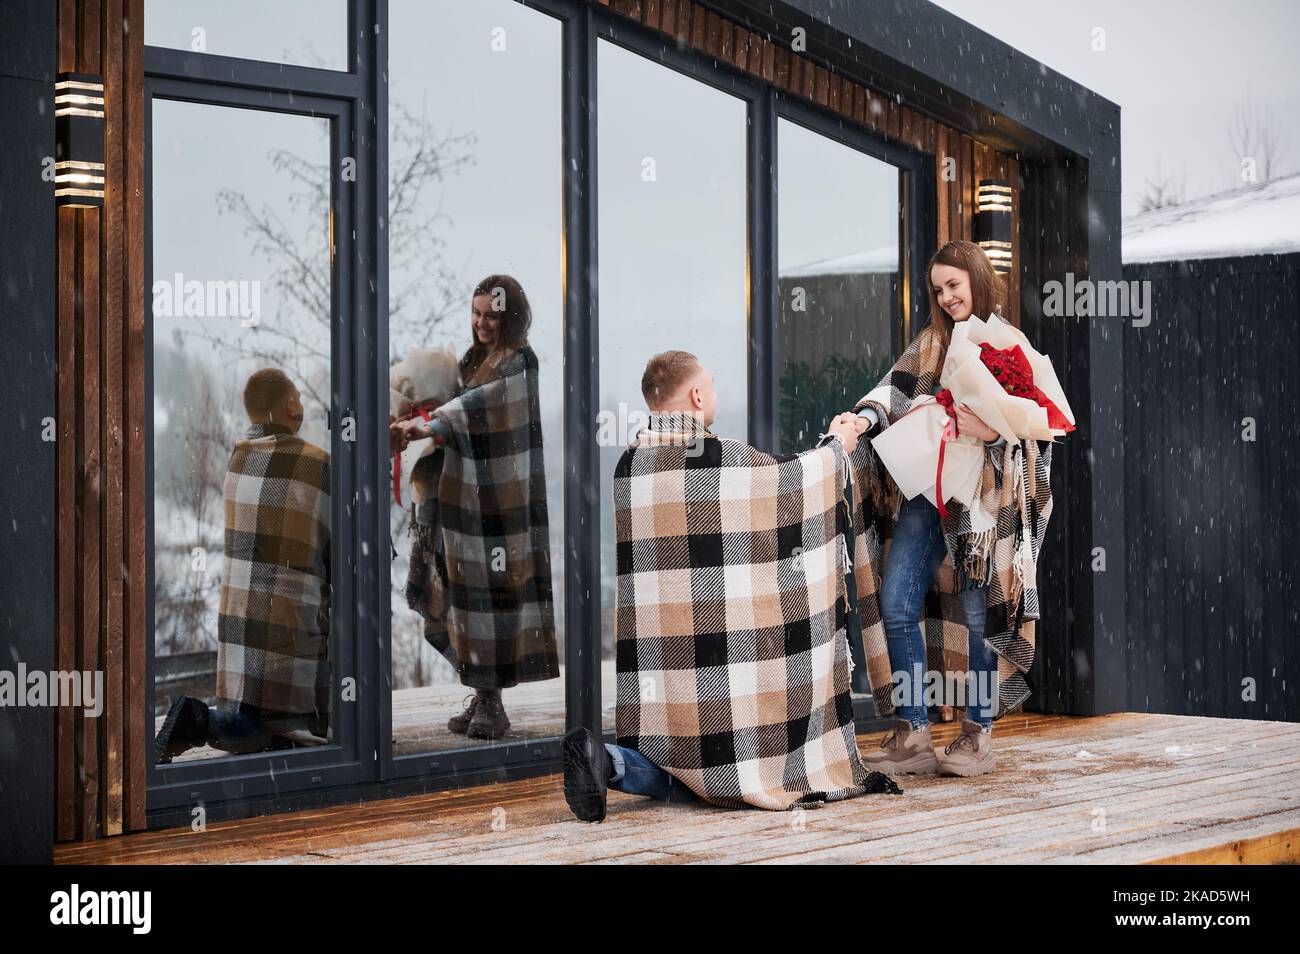 Happy woman holding bouquet of flowers and smiling while man making marriage proposal under winter snow. Couple sharing romantic moment outside scandinavian wooden house barnhouse. Stock Photo